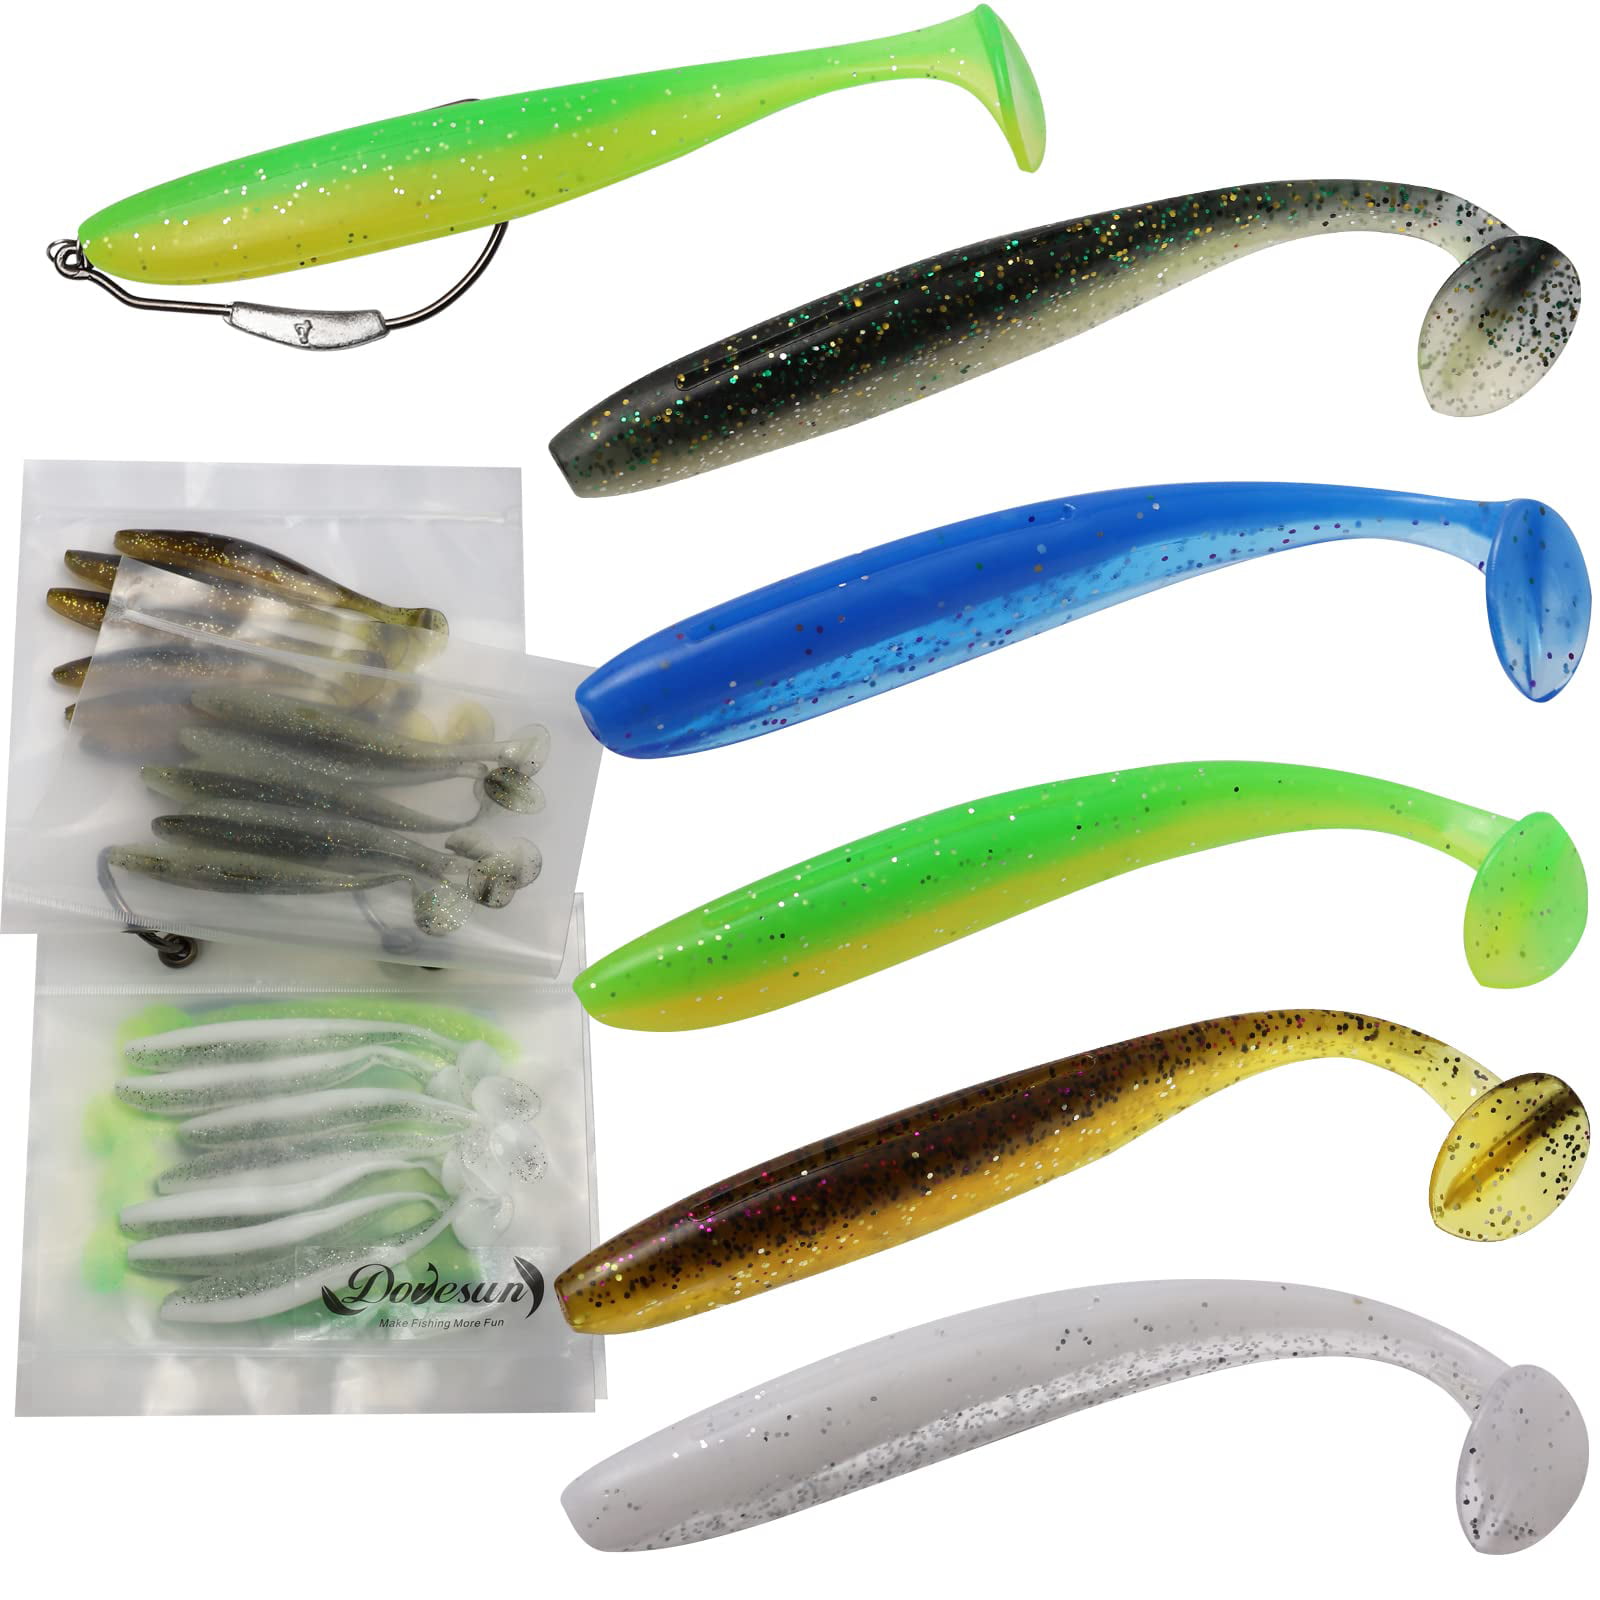 DMSHARK Paddle Tail Ribbed Swimbaits 4 inch Soft Plastic Fishing Bass Lures  3 Pcs for Freshwater Saltwater